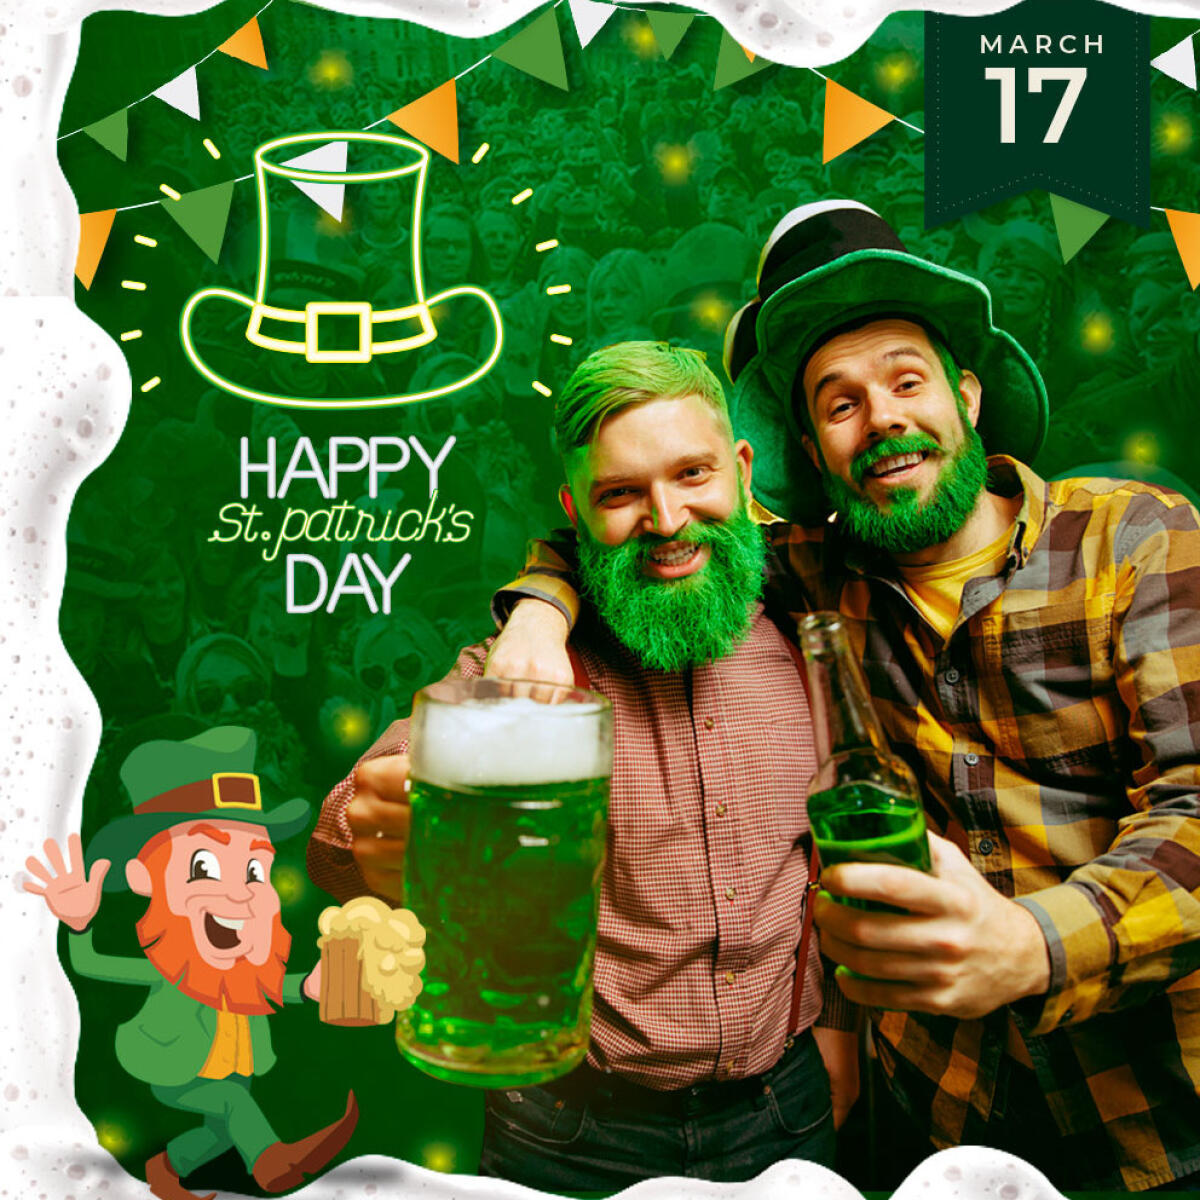 Celebrate St Patrick's Day with us